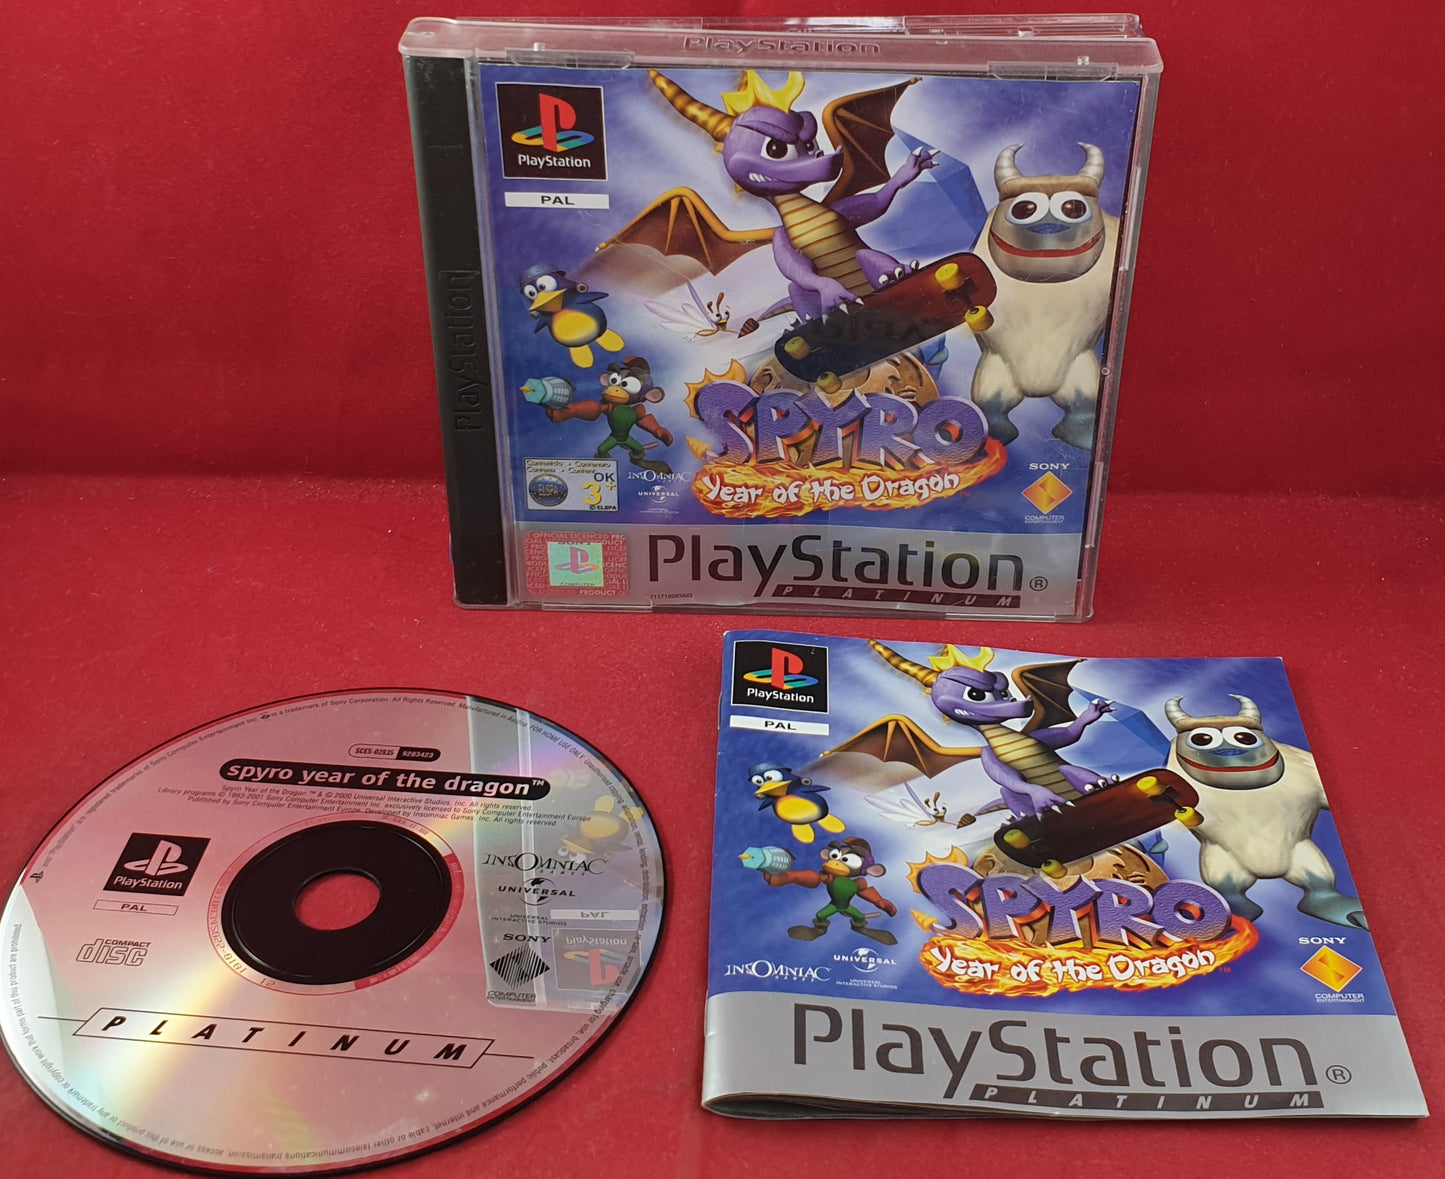 Spyro Year of the Dragon Platinum Sony Playstation 1 (PS1) Game